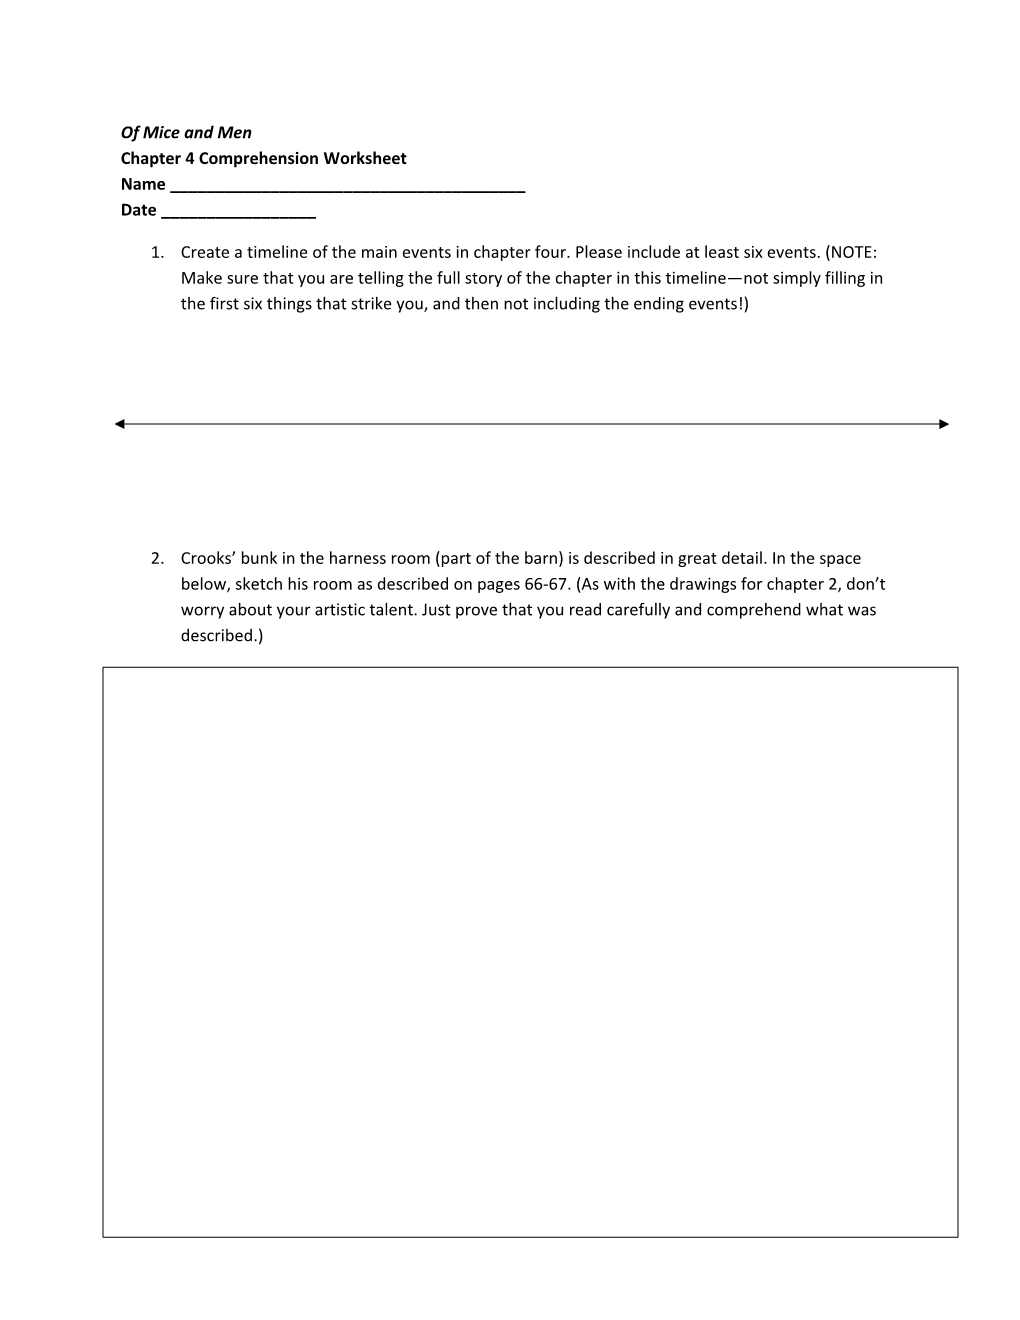 Of Mice and Men Chapter 4 Comprehension Worksheet Name ______ Date ______